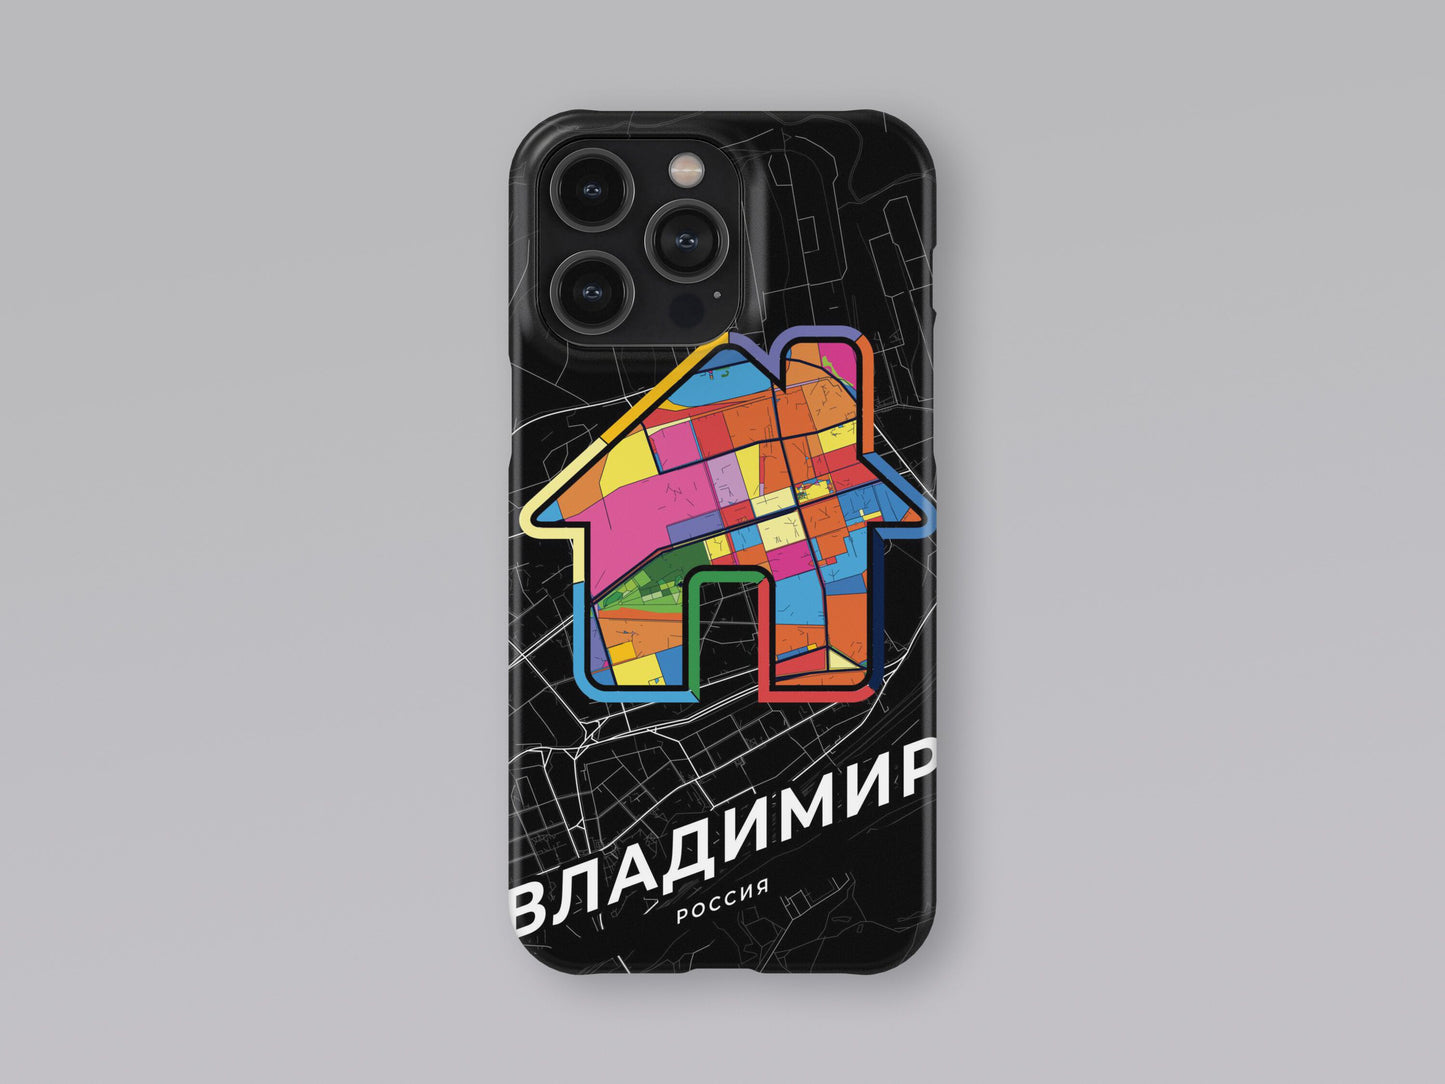 Vladimir Russia slim phone case with colorful icon 3